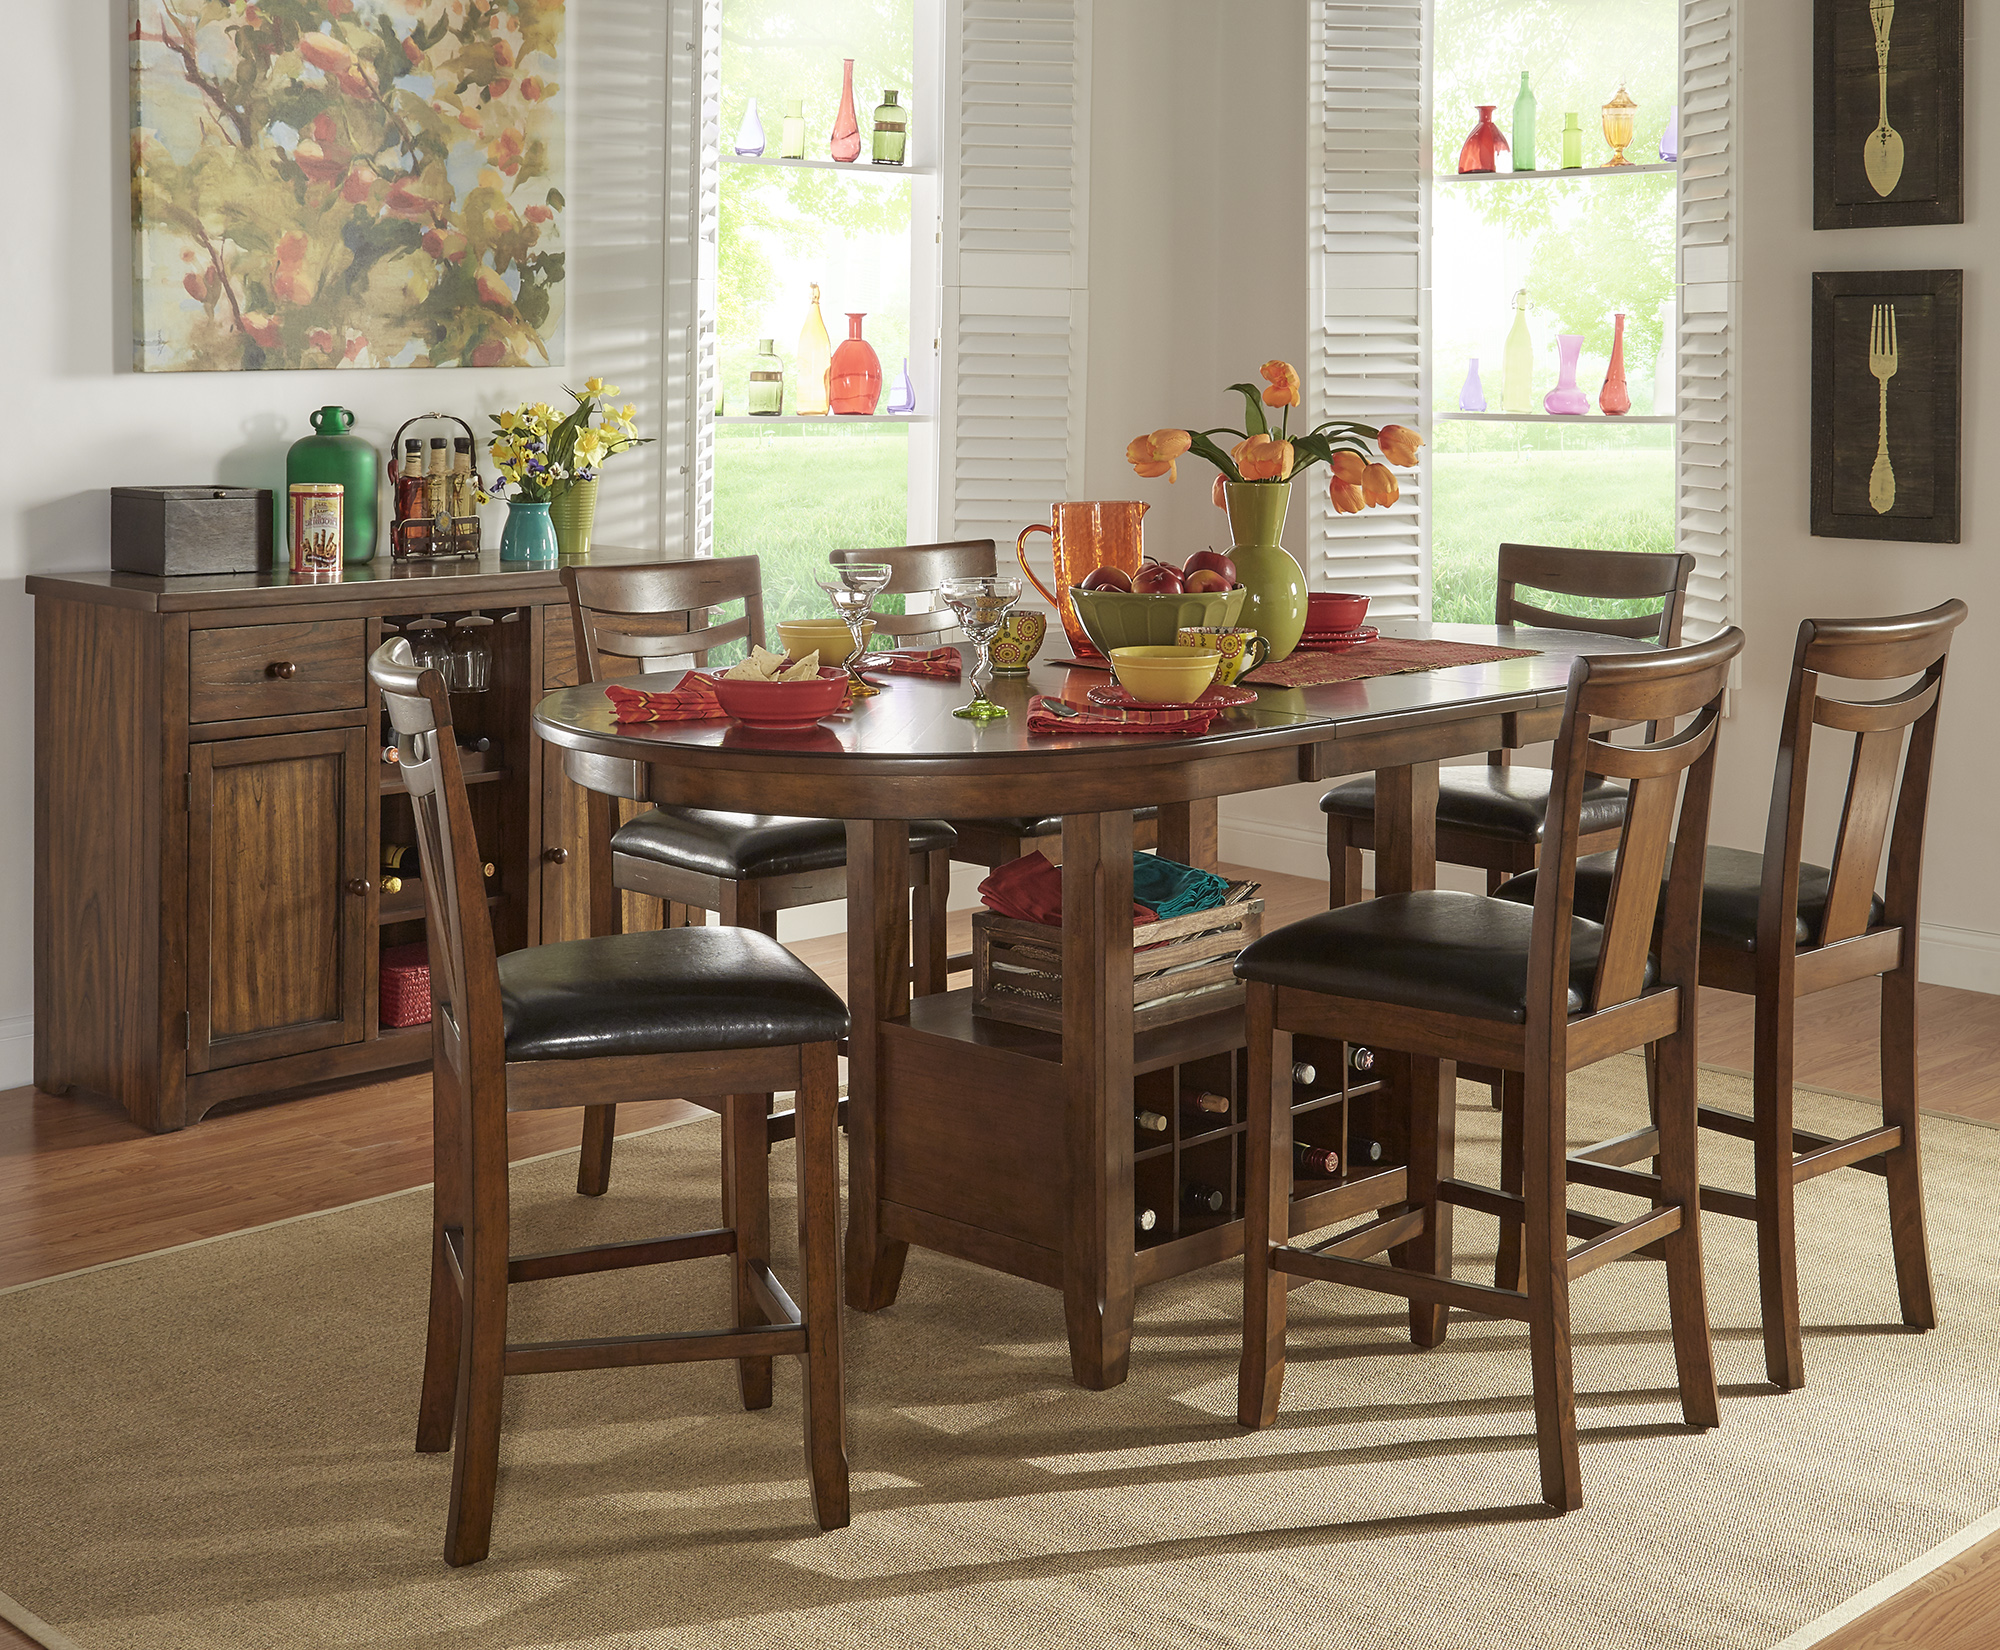 This is a more traditional one of our 10 inspiring dining combinations. It features a dark brown burnished oak dining set, with an oval-shaped dining table and 6 dining chairs. The dining table comes with a built-in wine rack in the base. The dining chairs have dark brown faux leather upholstered seats. The dining table is decorated with red, green, orange, and yellow accessories, perfect for fall.